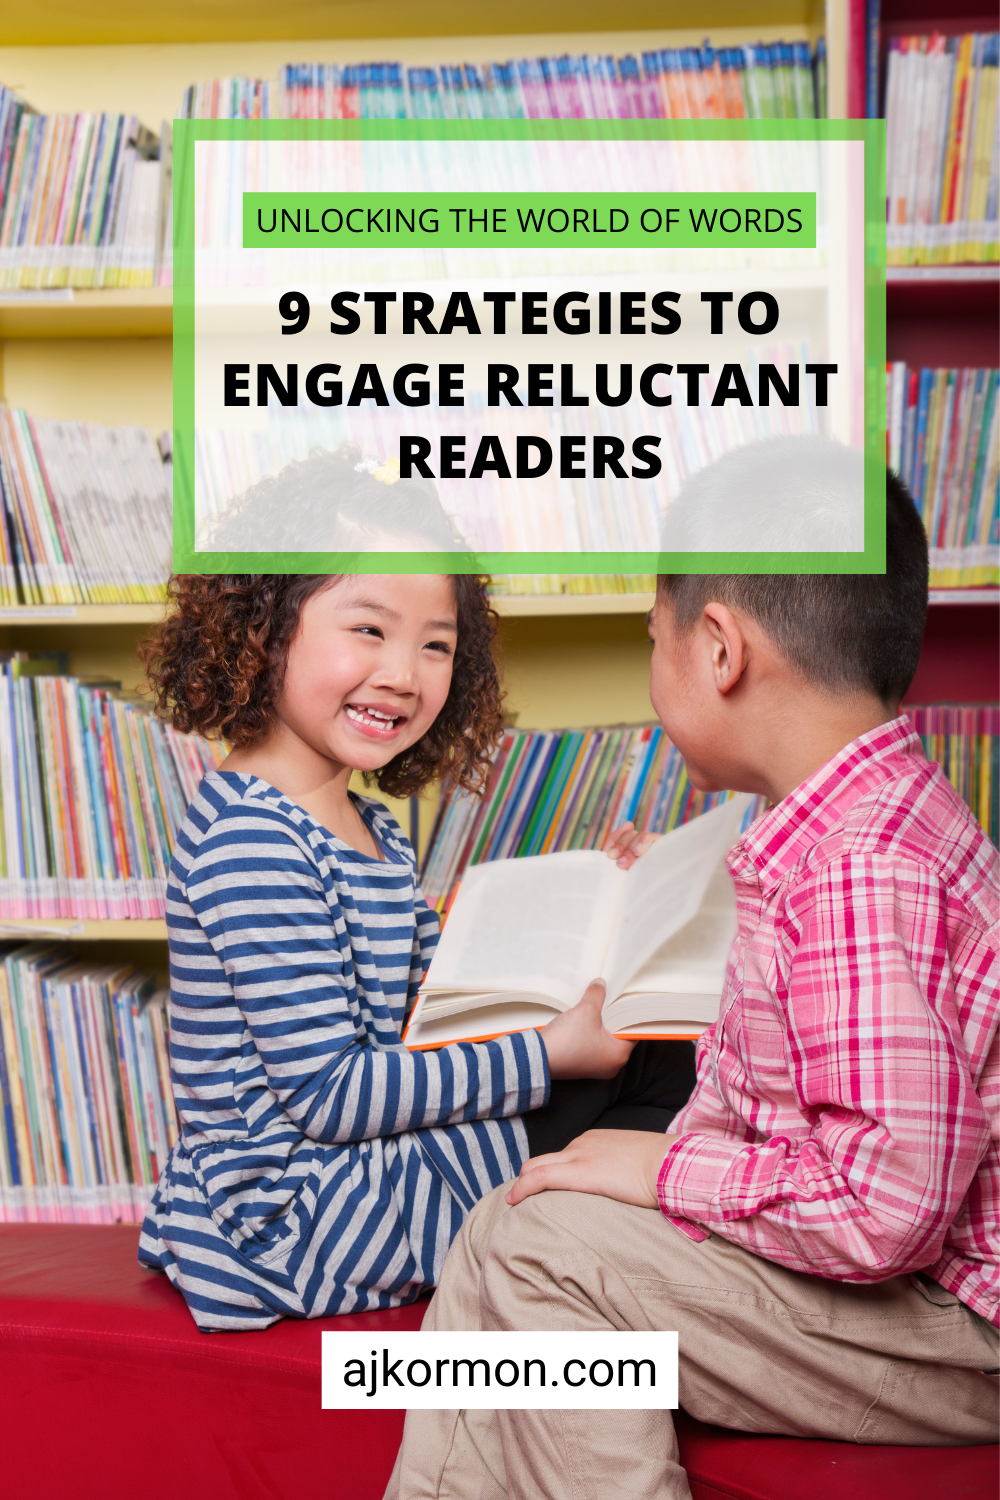 9 Strategies to Engage Reluctant Readers